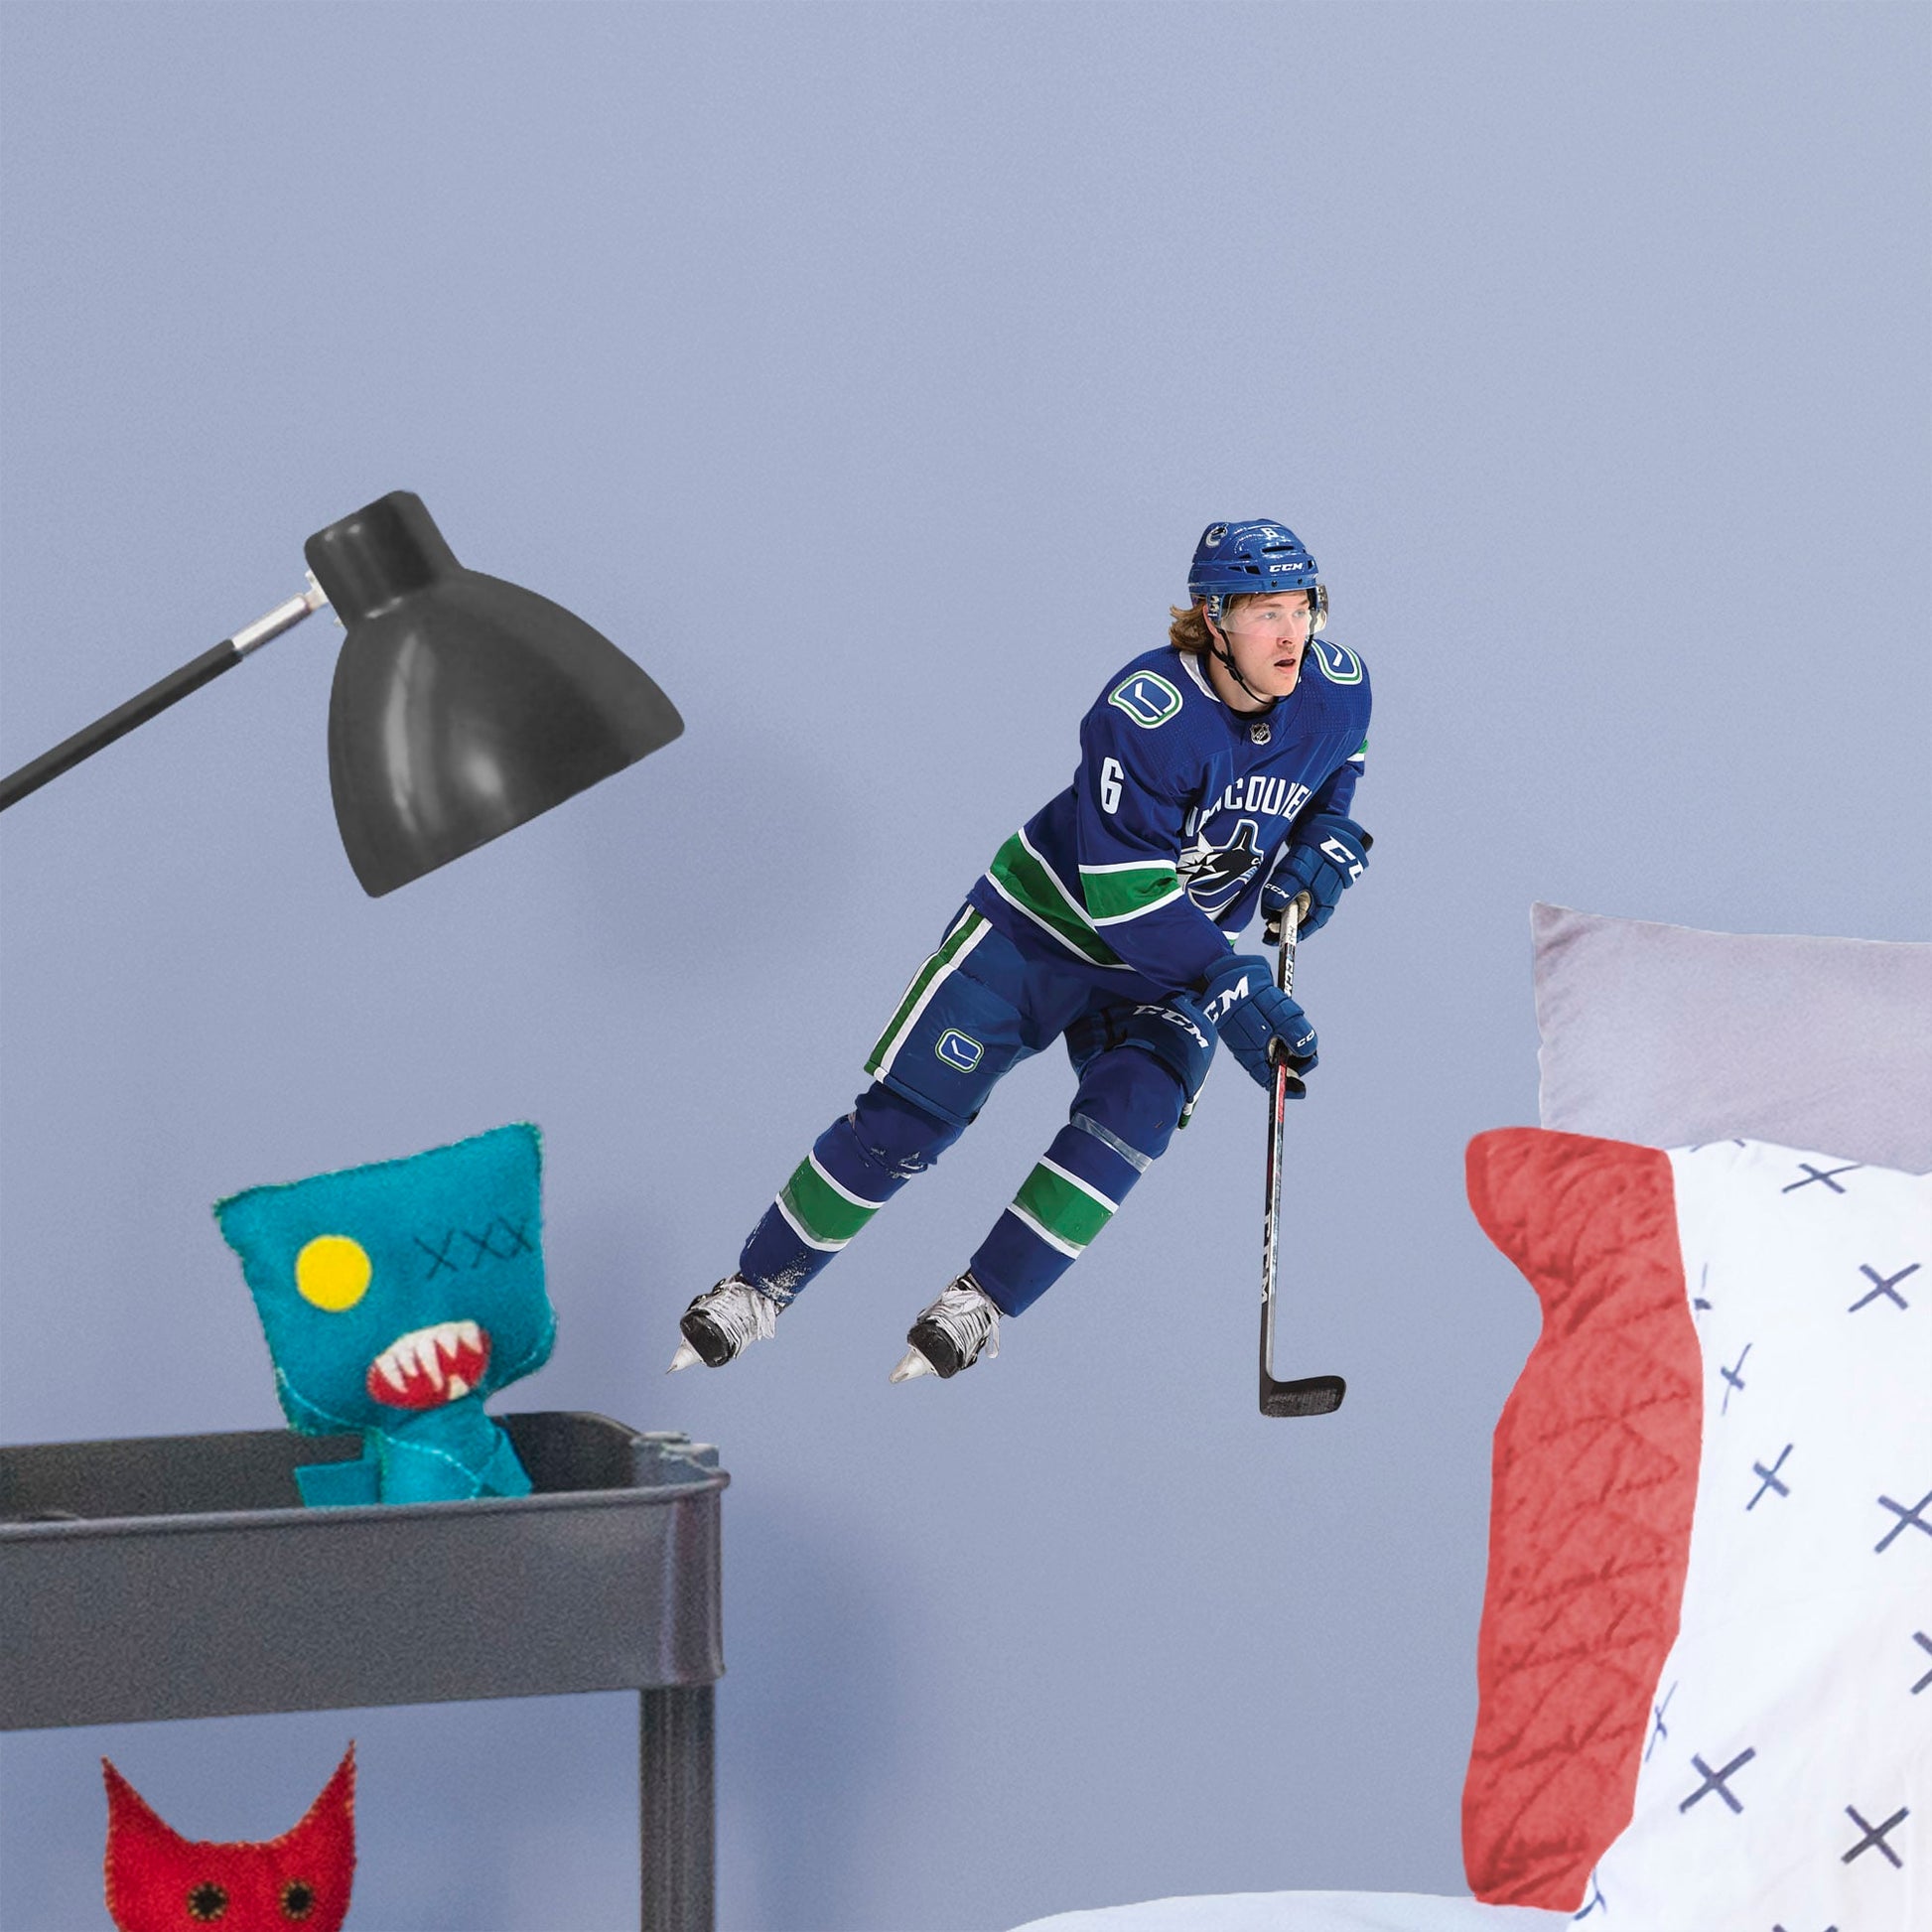 Large Athlete + 2 Decals (13"W x 16"H) Everyone loves Brock Boeser, the first round pick from the 2015 draft, and now you can bring him to life in your bedroom, office, or fan room with this Officially Licensed NHL Wall Decal. Skating to life in the Canucks home uniform, this removable wall decal of Boeser is sure to bring some action to your home, no matter how many times you need to move and restick it!